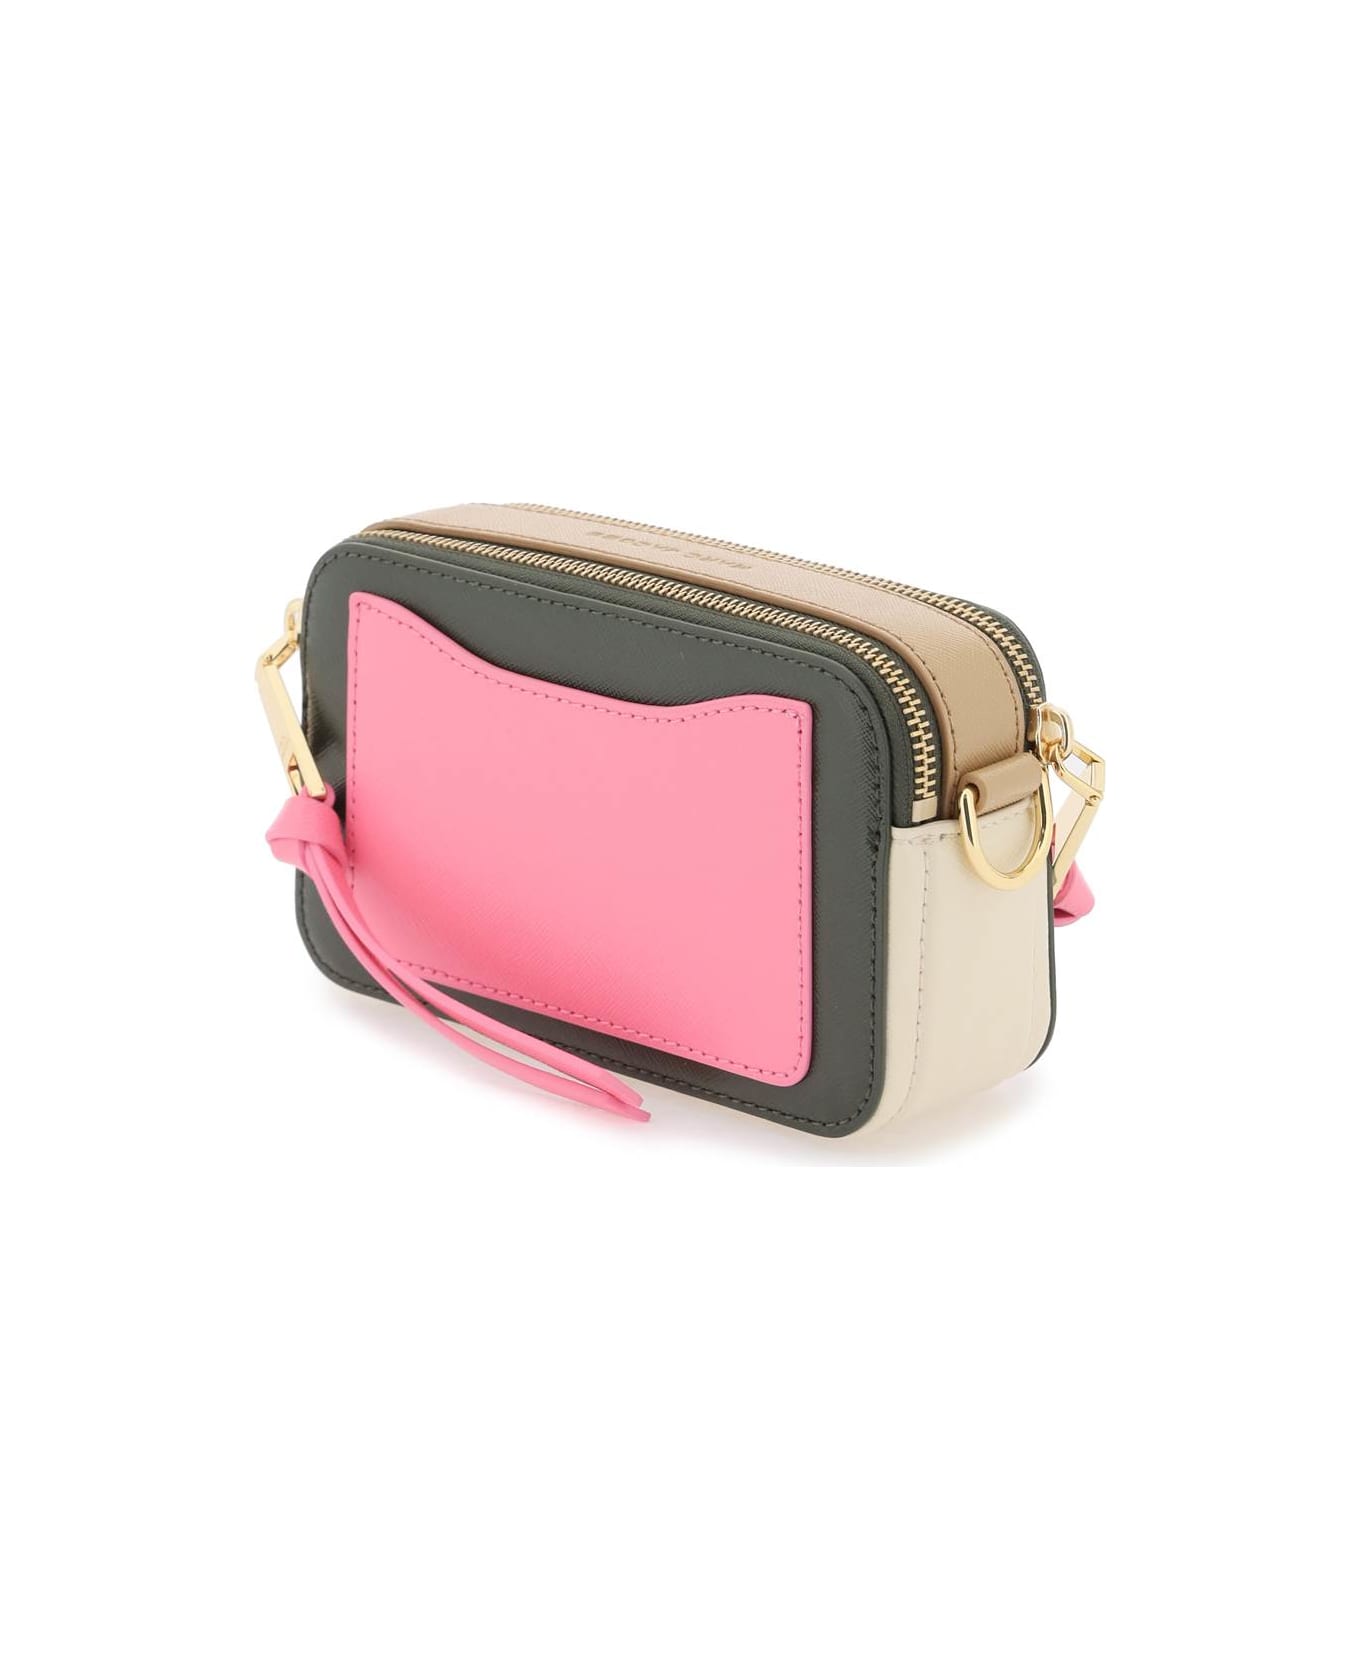 Marc Jacobs The Snapshot Camera Bag - FOREST MULTI (White)